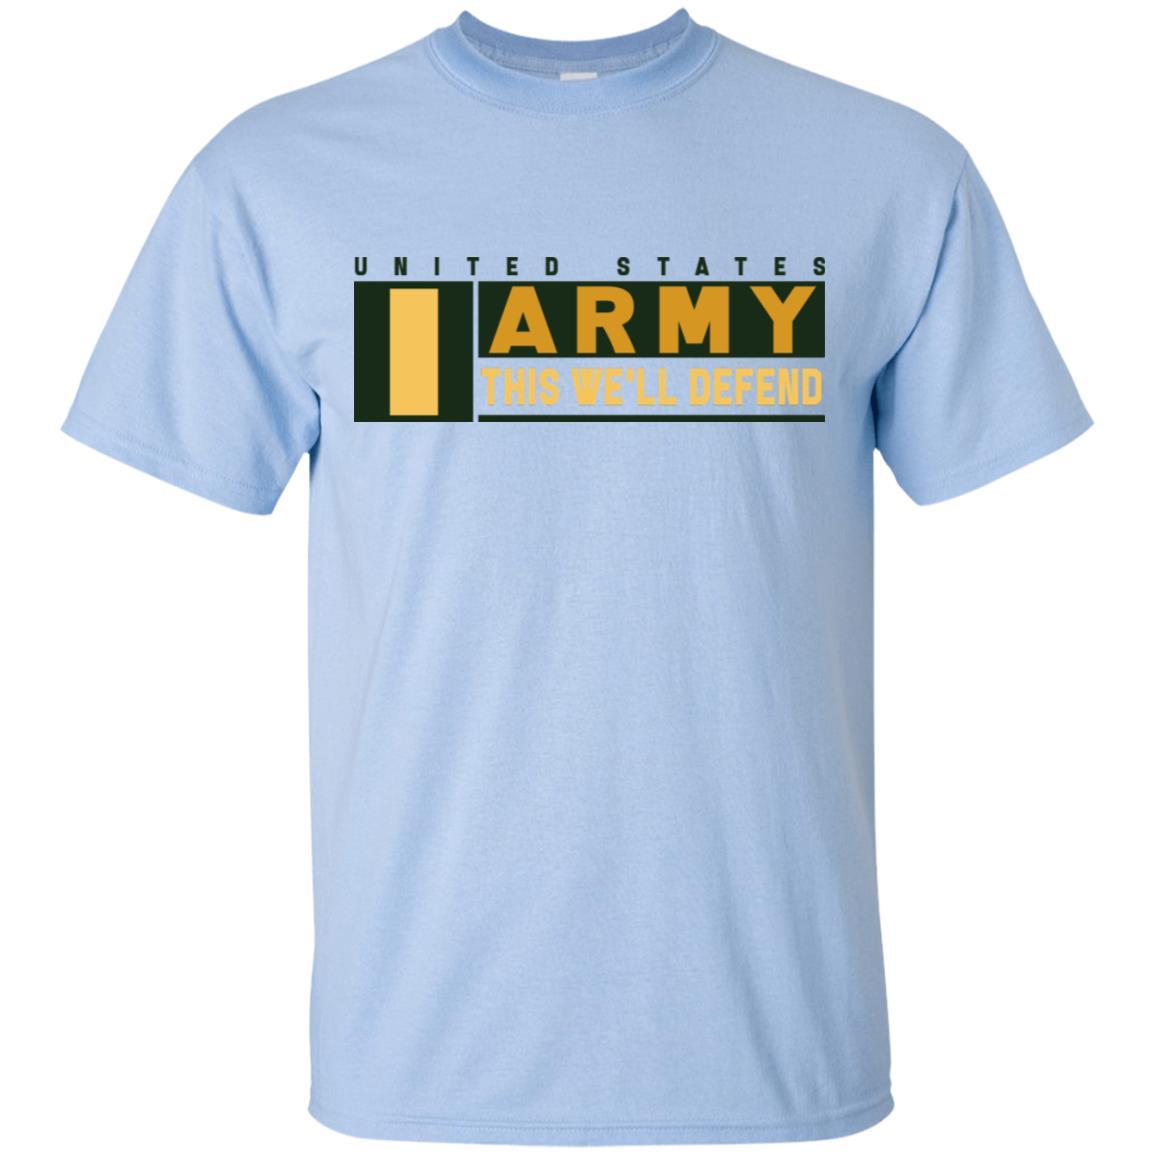 US Army O-1 This We Will Defend T-Shirt On Front For Men-TShirt-Army-Veterans Nation